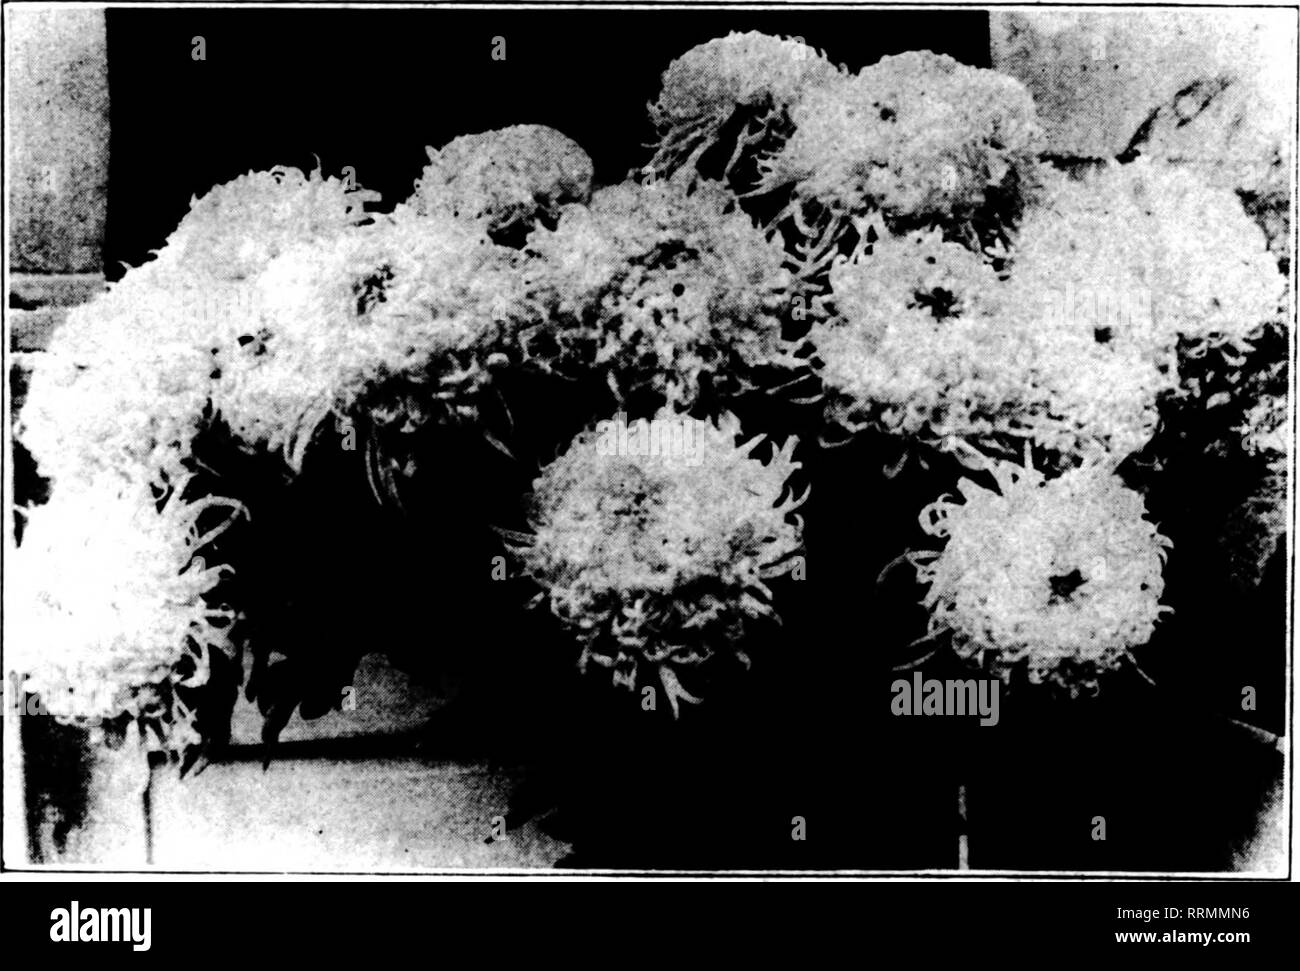 . Florists' review [microform]. Floriculture. 8 The Rorists' Review Maech 8, 1917. THE NEW l?O.SE ^ ROSE-PINK OPHELIA A beautiful shade of Rose-pink. We will book orders for 40,000 only and orders will be filled in rotation.  $30.00 70.00 PRICES OWN ROOT per 100 $125.00 per 500 plants per 250 250.00 per 1000 plants PRICES GRAETED $35.00.. .v. per 100 $150.00 per 500 plants 82.50 per 250 300.00 per 1000 plants BREITNEYER FLORAL COMPANY MT. CLEMENS, MICHIGAN FRED BREITMEYER, Proprietor ^rrnX CHRYSANTHEMUM CERTIFICATE OF MERIT awarded by Chrysanthemum Society of America Picture was taken Decembe Stock Photo